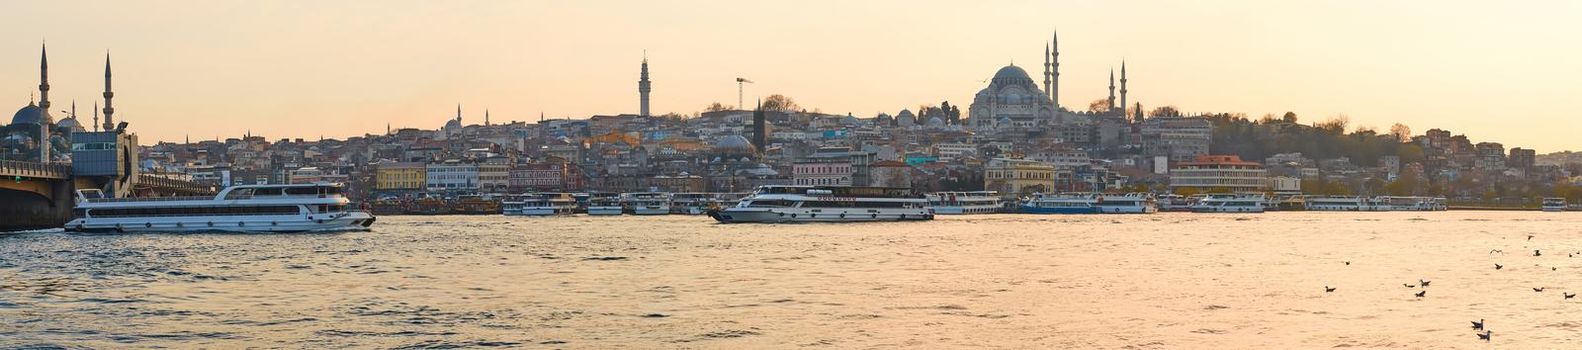 Tourist boat sails on the Golden Horn in Istanbul at sunset, Turkey